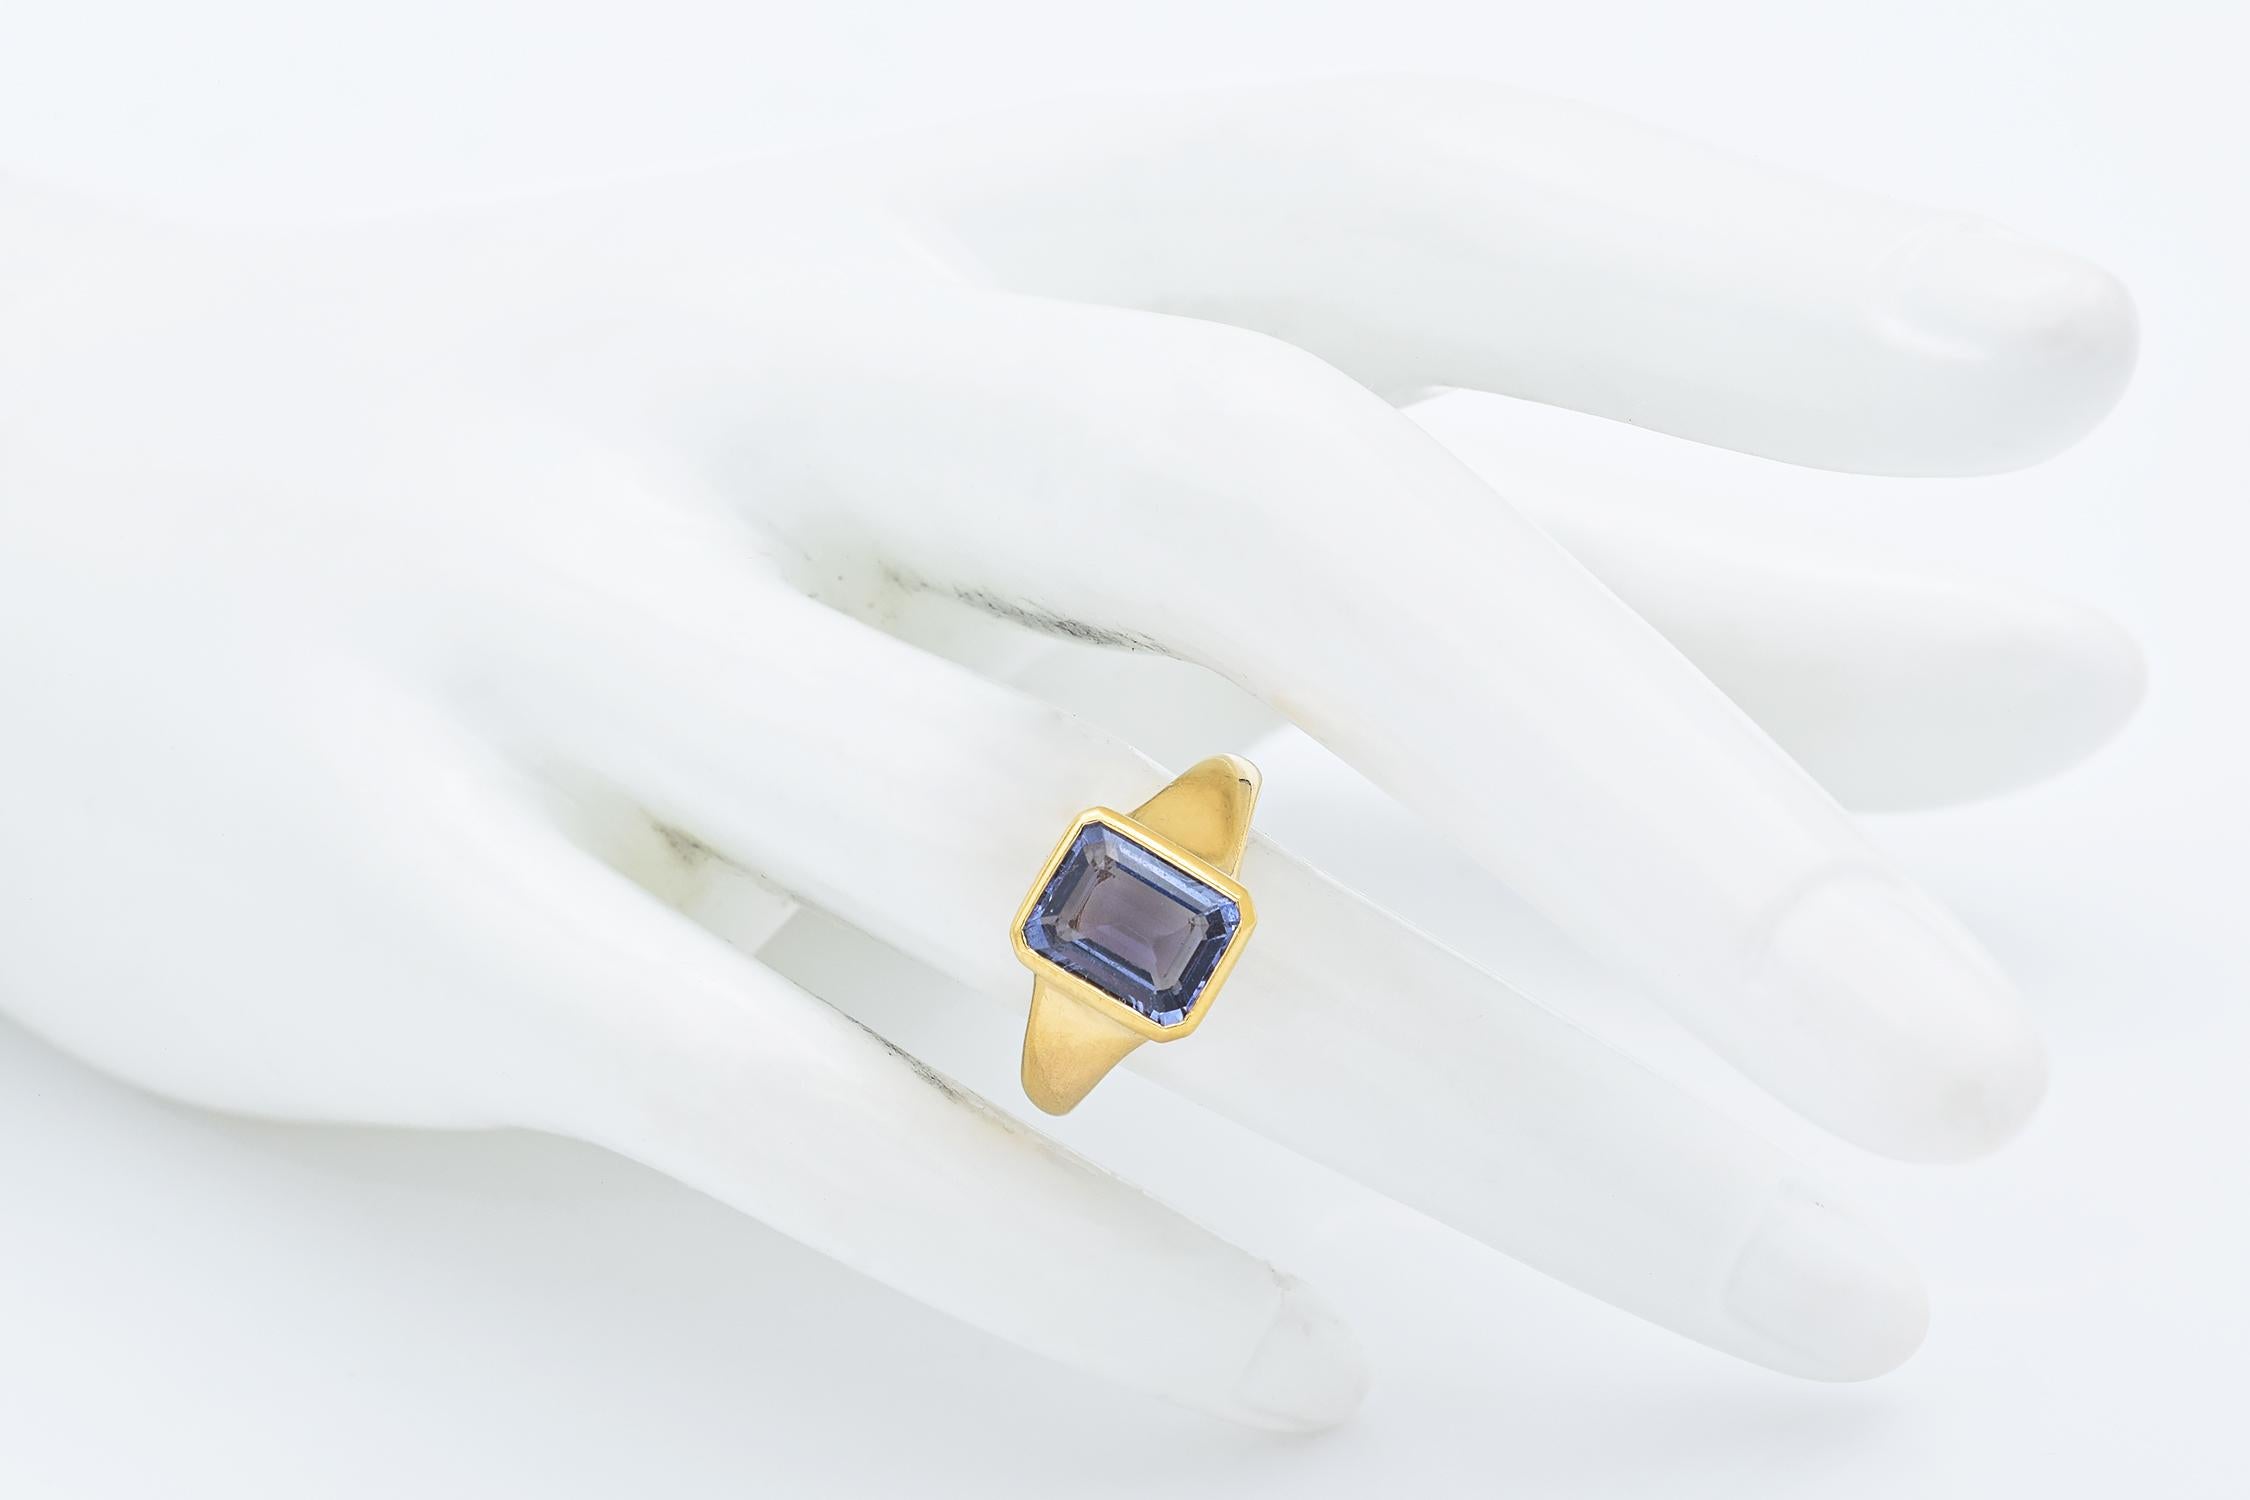 Women's Vintage Bvlgari Tanzanite Yellow Gold Band Ring with Pouch Size 5.25